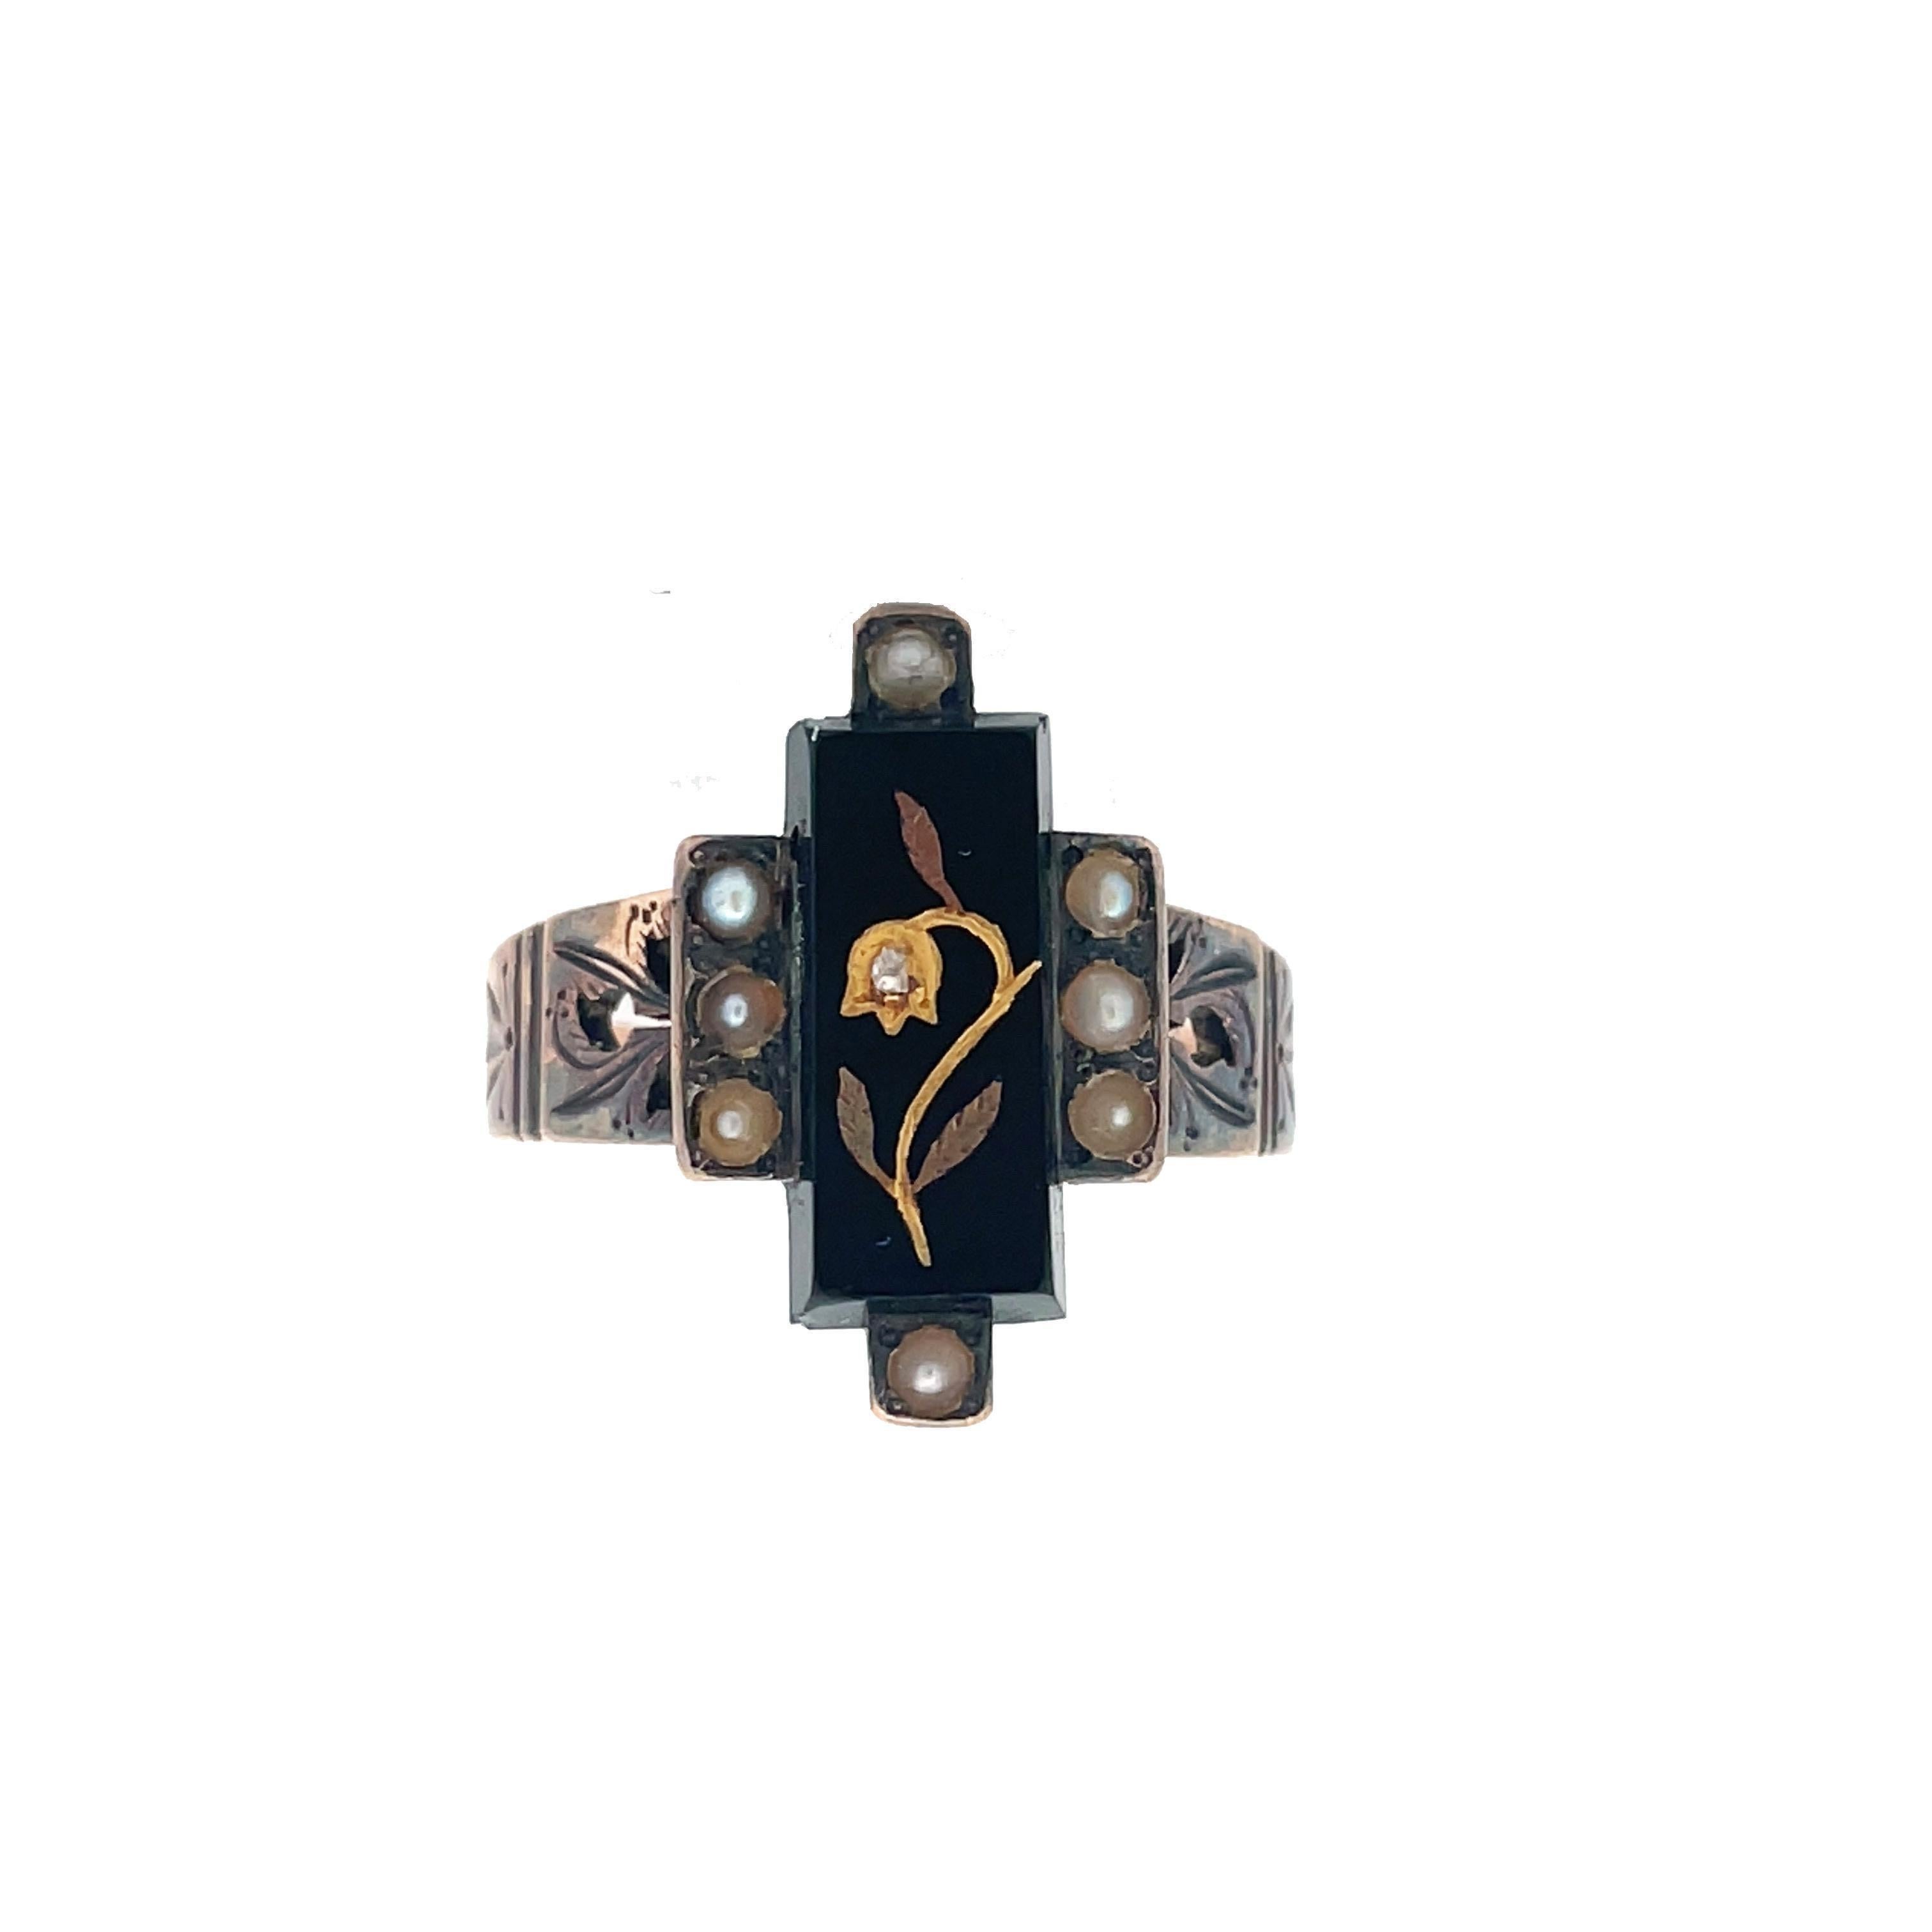 This is a spectacular Victorian ring crafted in 14K Rose Gold showcasing a rectangular black-onyx tablet adorned with seed pearls and a gold flower inlay with a sparkling diamond! A beautiful rectangular tablet of onyx is embellished with a flower